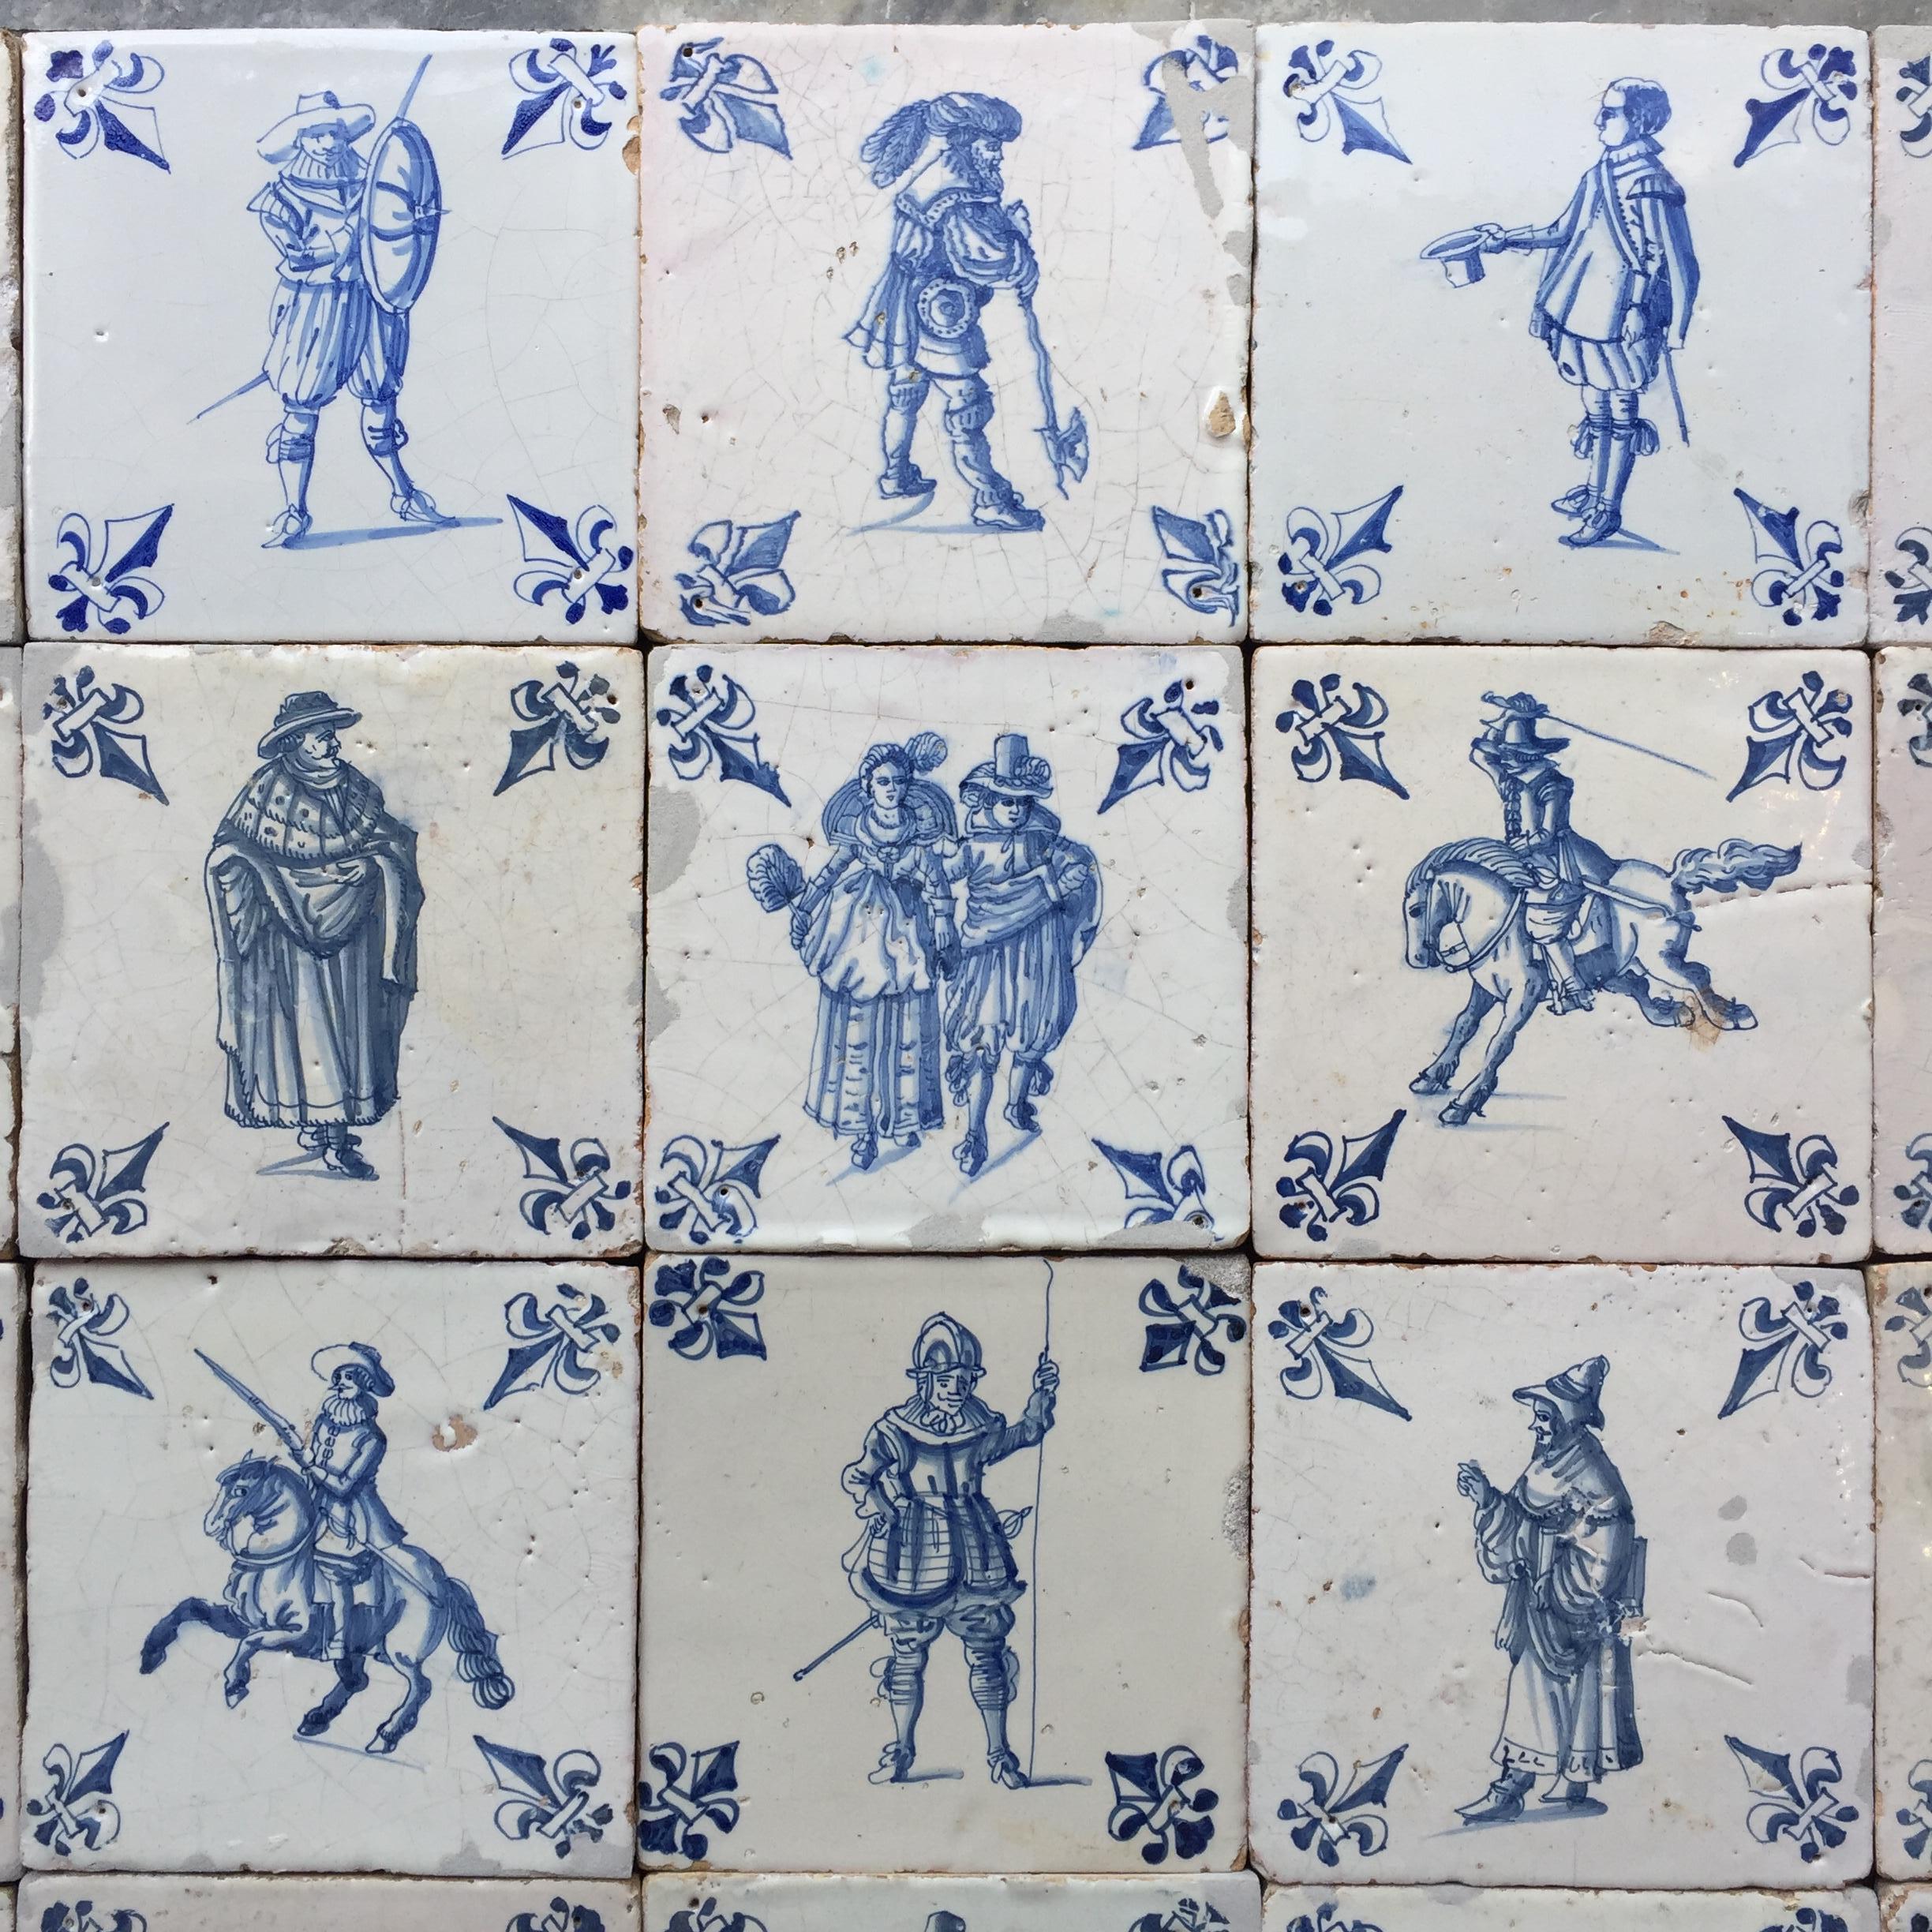 An exceptional set of 20 blue and white Dutch Delft tiles with figures from daily life.
Made in Amsterdam, The Netherlands.
Circa 1620 - 1640.

This set of tiles is of very fine quality and has a bright glaze, characteristic for the Amsterdam